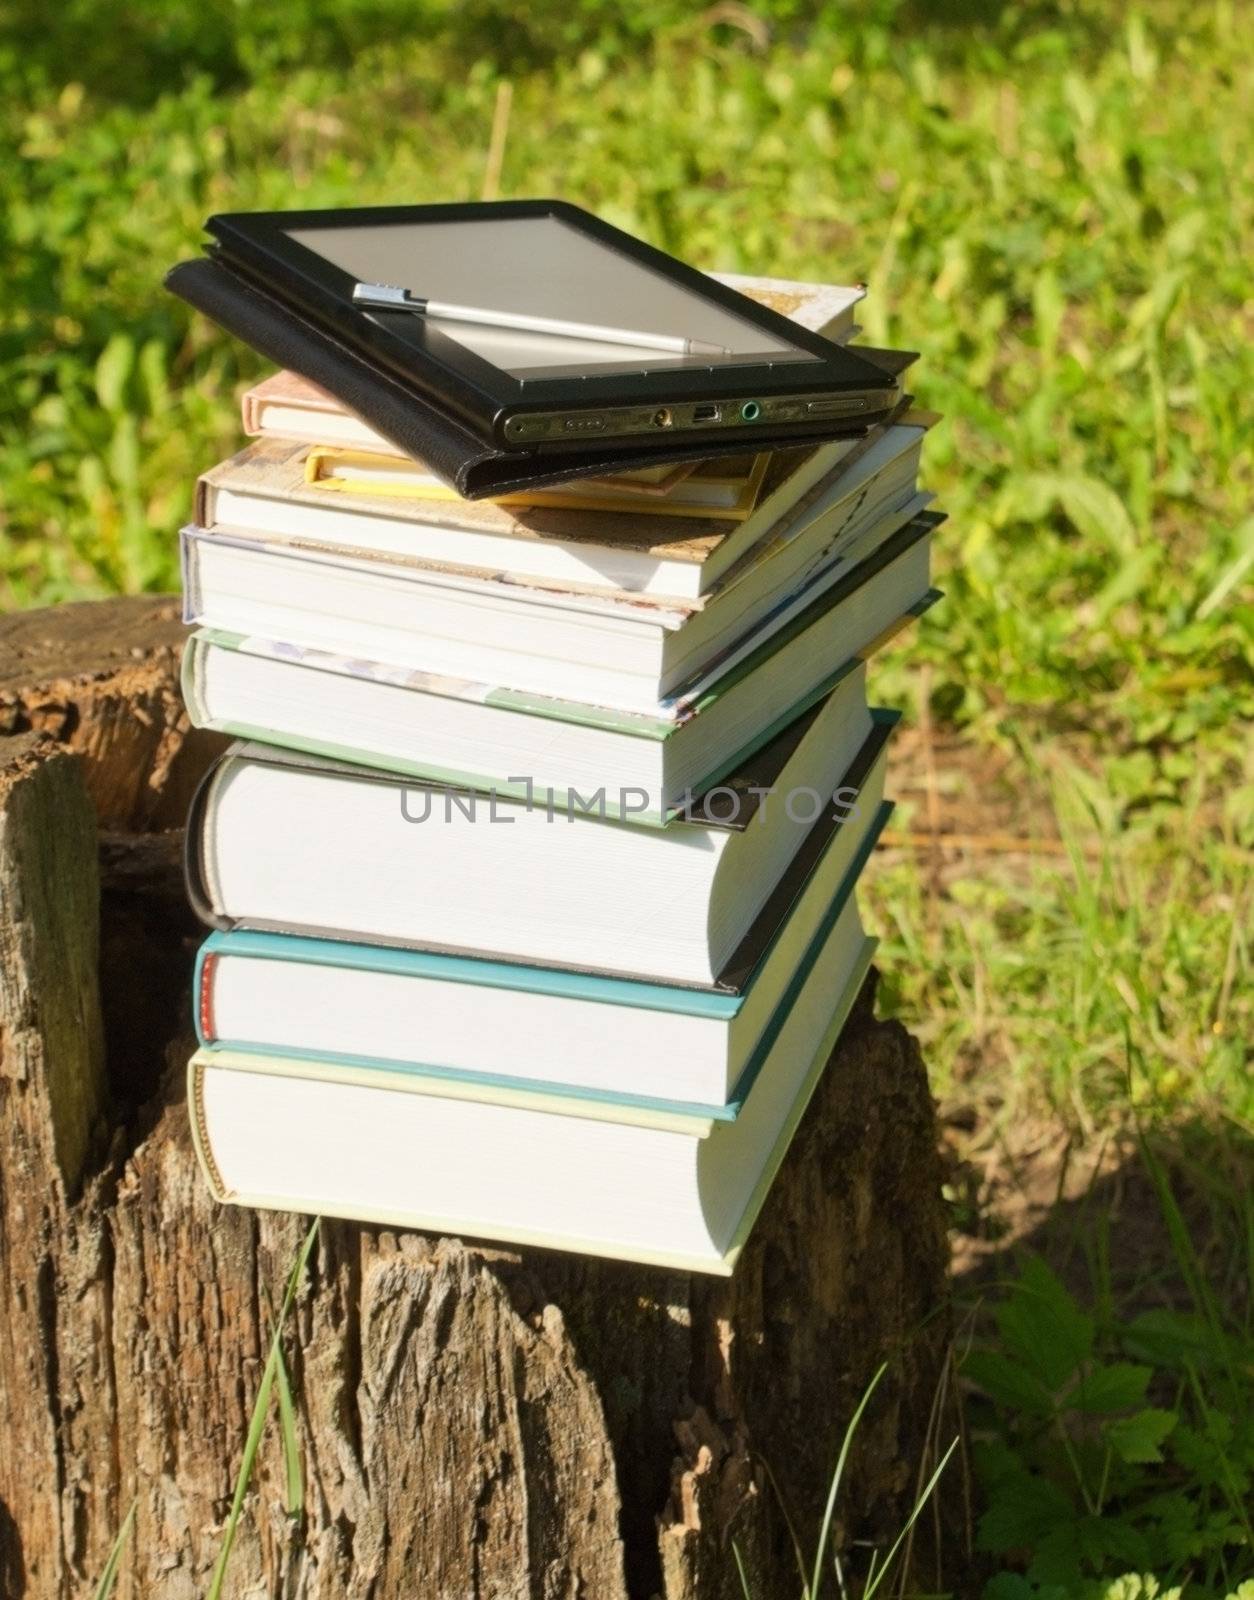 Stack of colorful books and electronic book reader